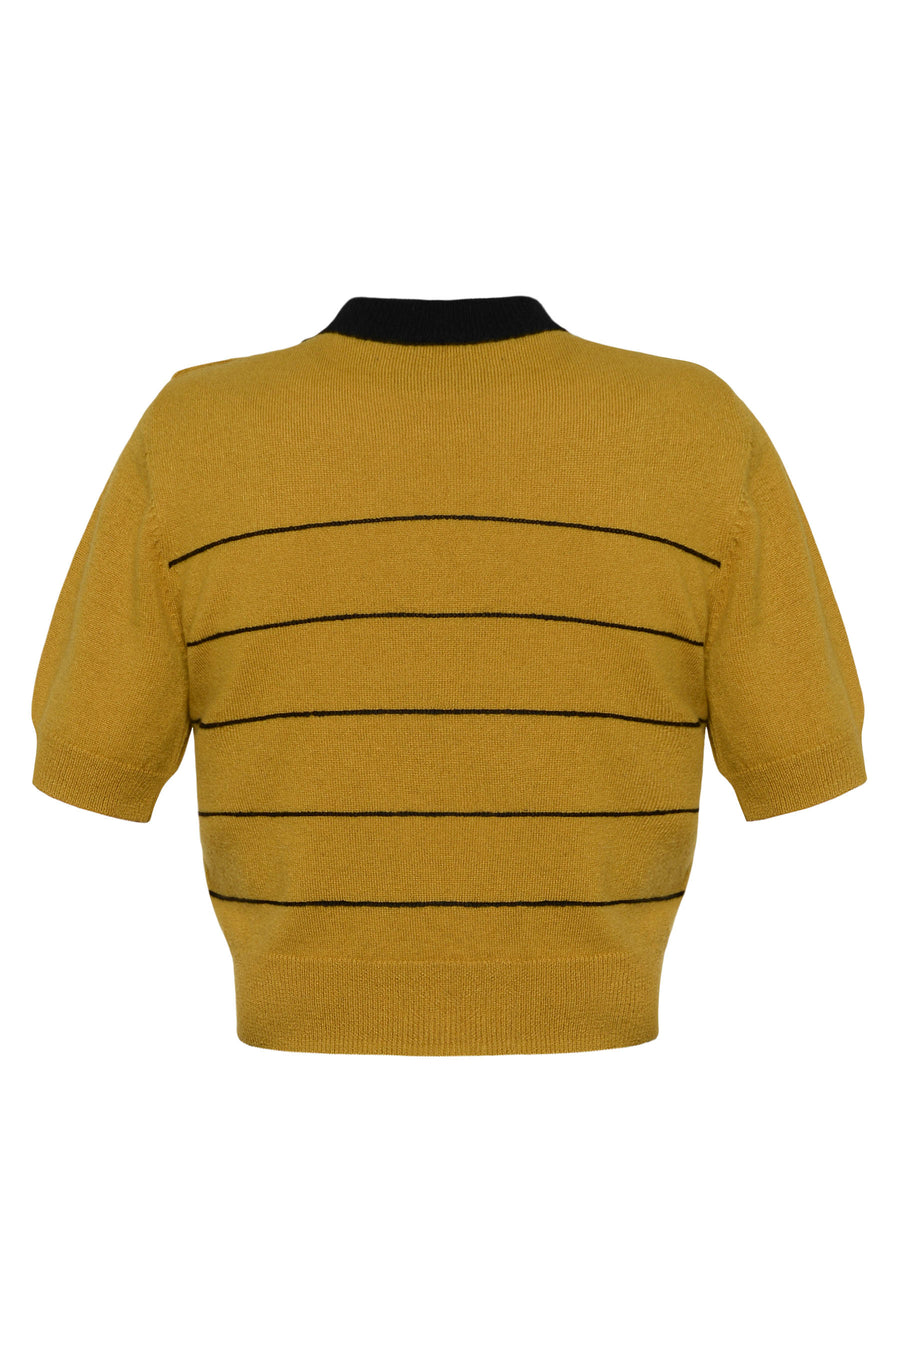 Wool-Cashmere Striped Top